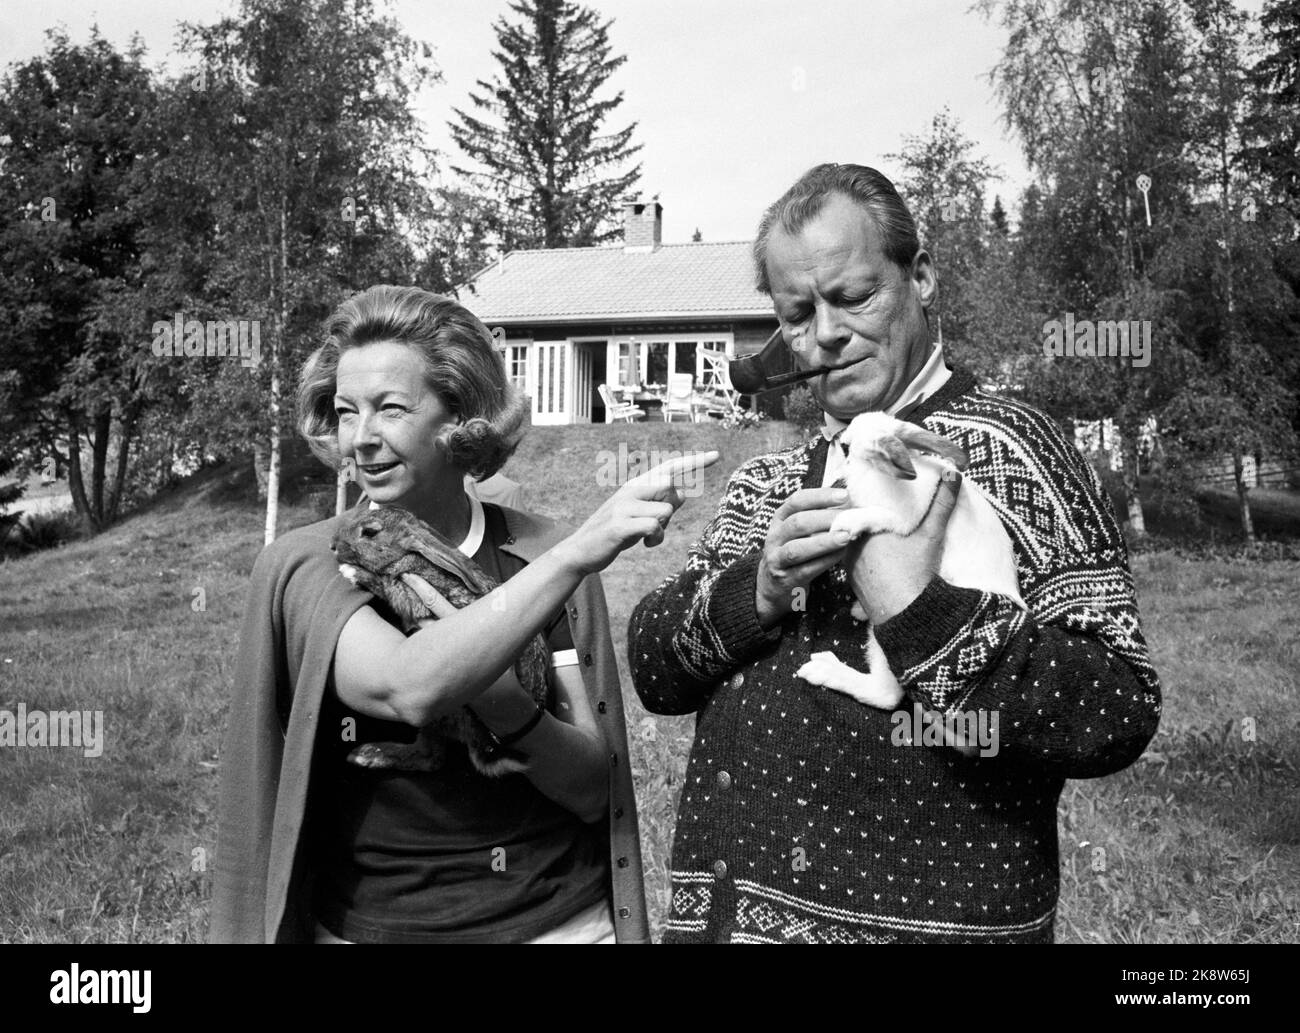 Hamar in the summer of 1970. West Germany's Chancellor Willy Brandt and Mrs. Rut Brandt bought a cabin in Vangsåsen in 1965 at Hamar, and here they spend their summer holidays with the family. They also have some rabbits in retirement, which is returned when the summer is over. Shooting someone you have seen in the eyes is completely out of date. Photo: Ivar Aaserud / Current / NTB Stock Photo